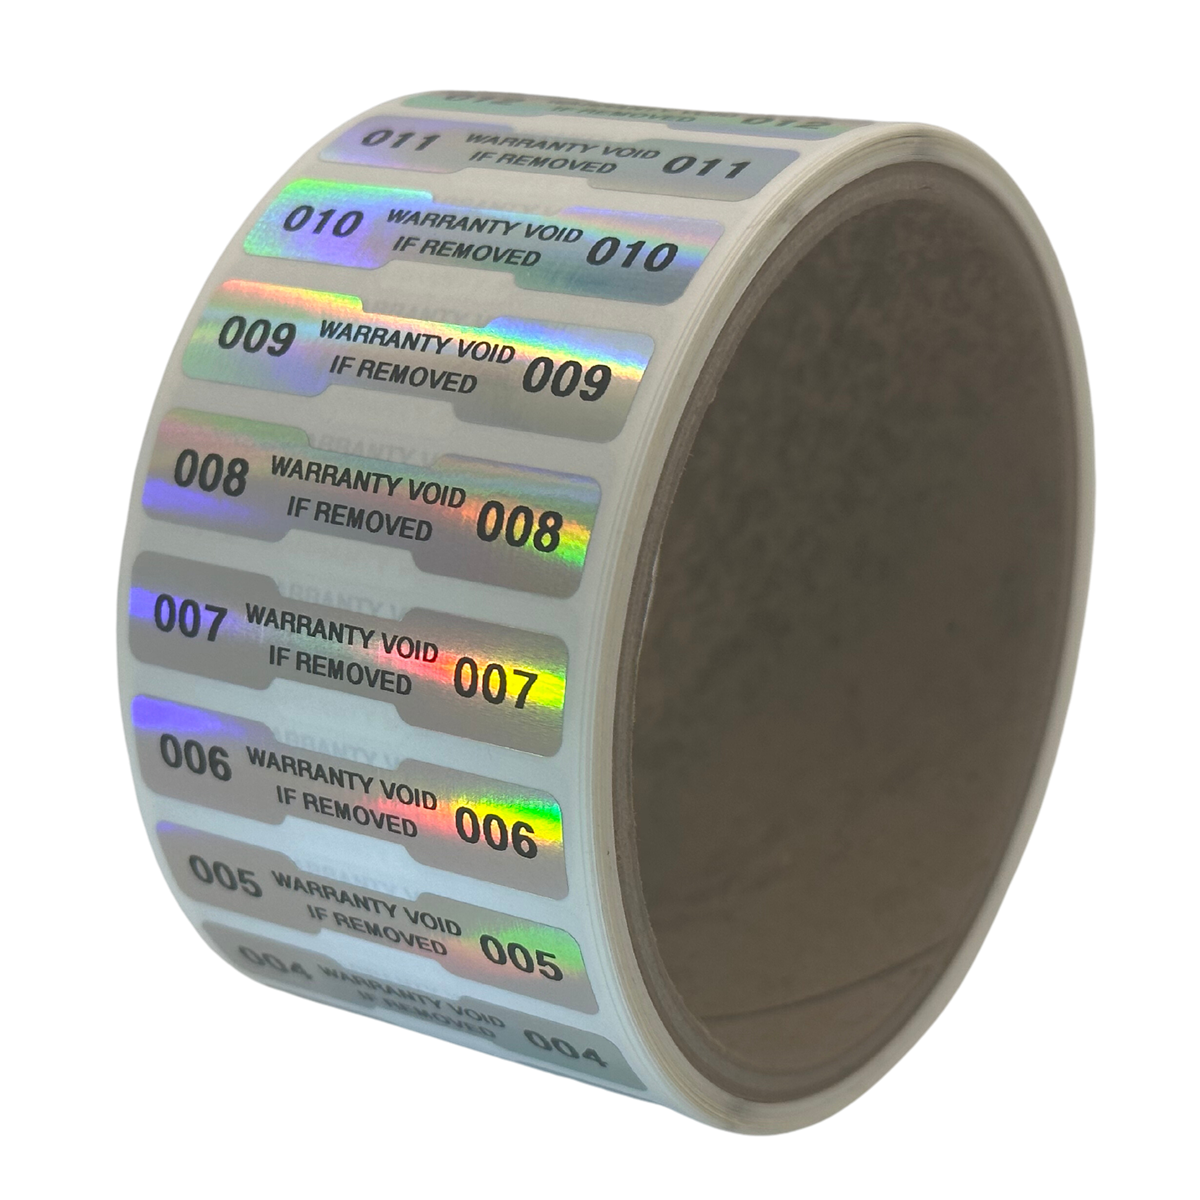 2,000 Tamper Evident Rainbow Non Residue Security Labels TamperGuard® Seal Sticker, Dogbone 1.75" x 0.375" (44mm x 9mm). Printed: Warranty Void if Removed + Serialized